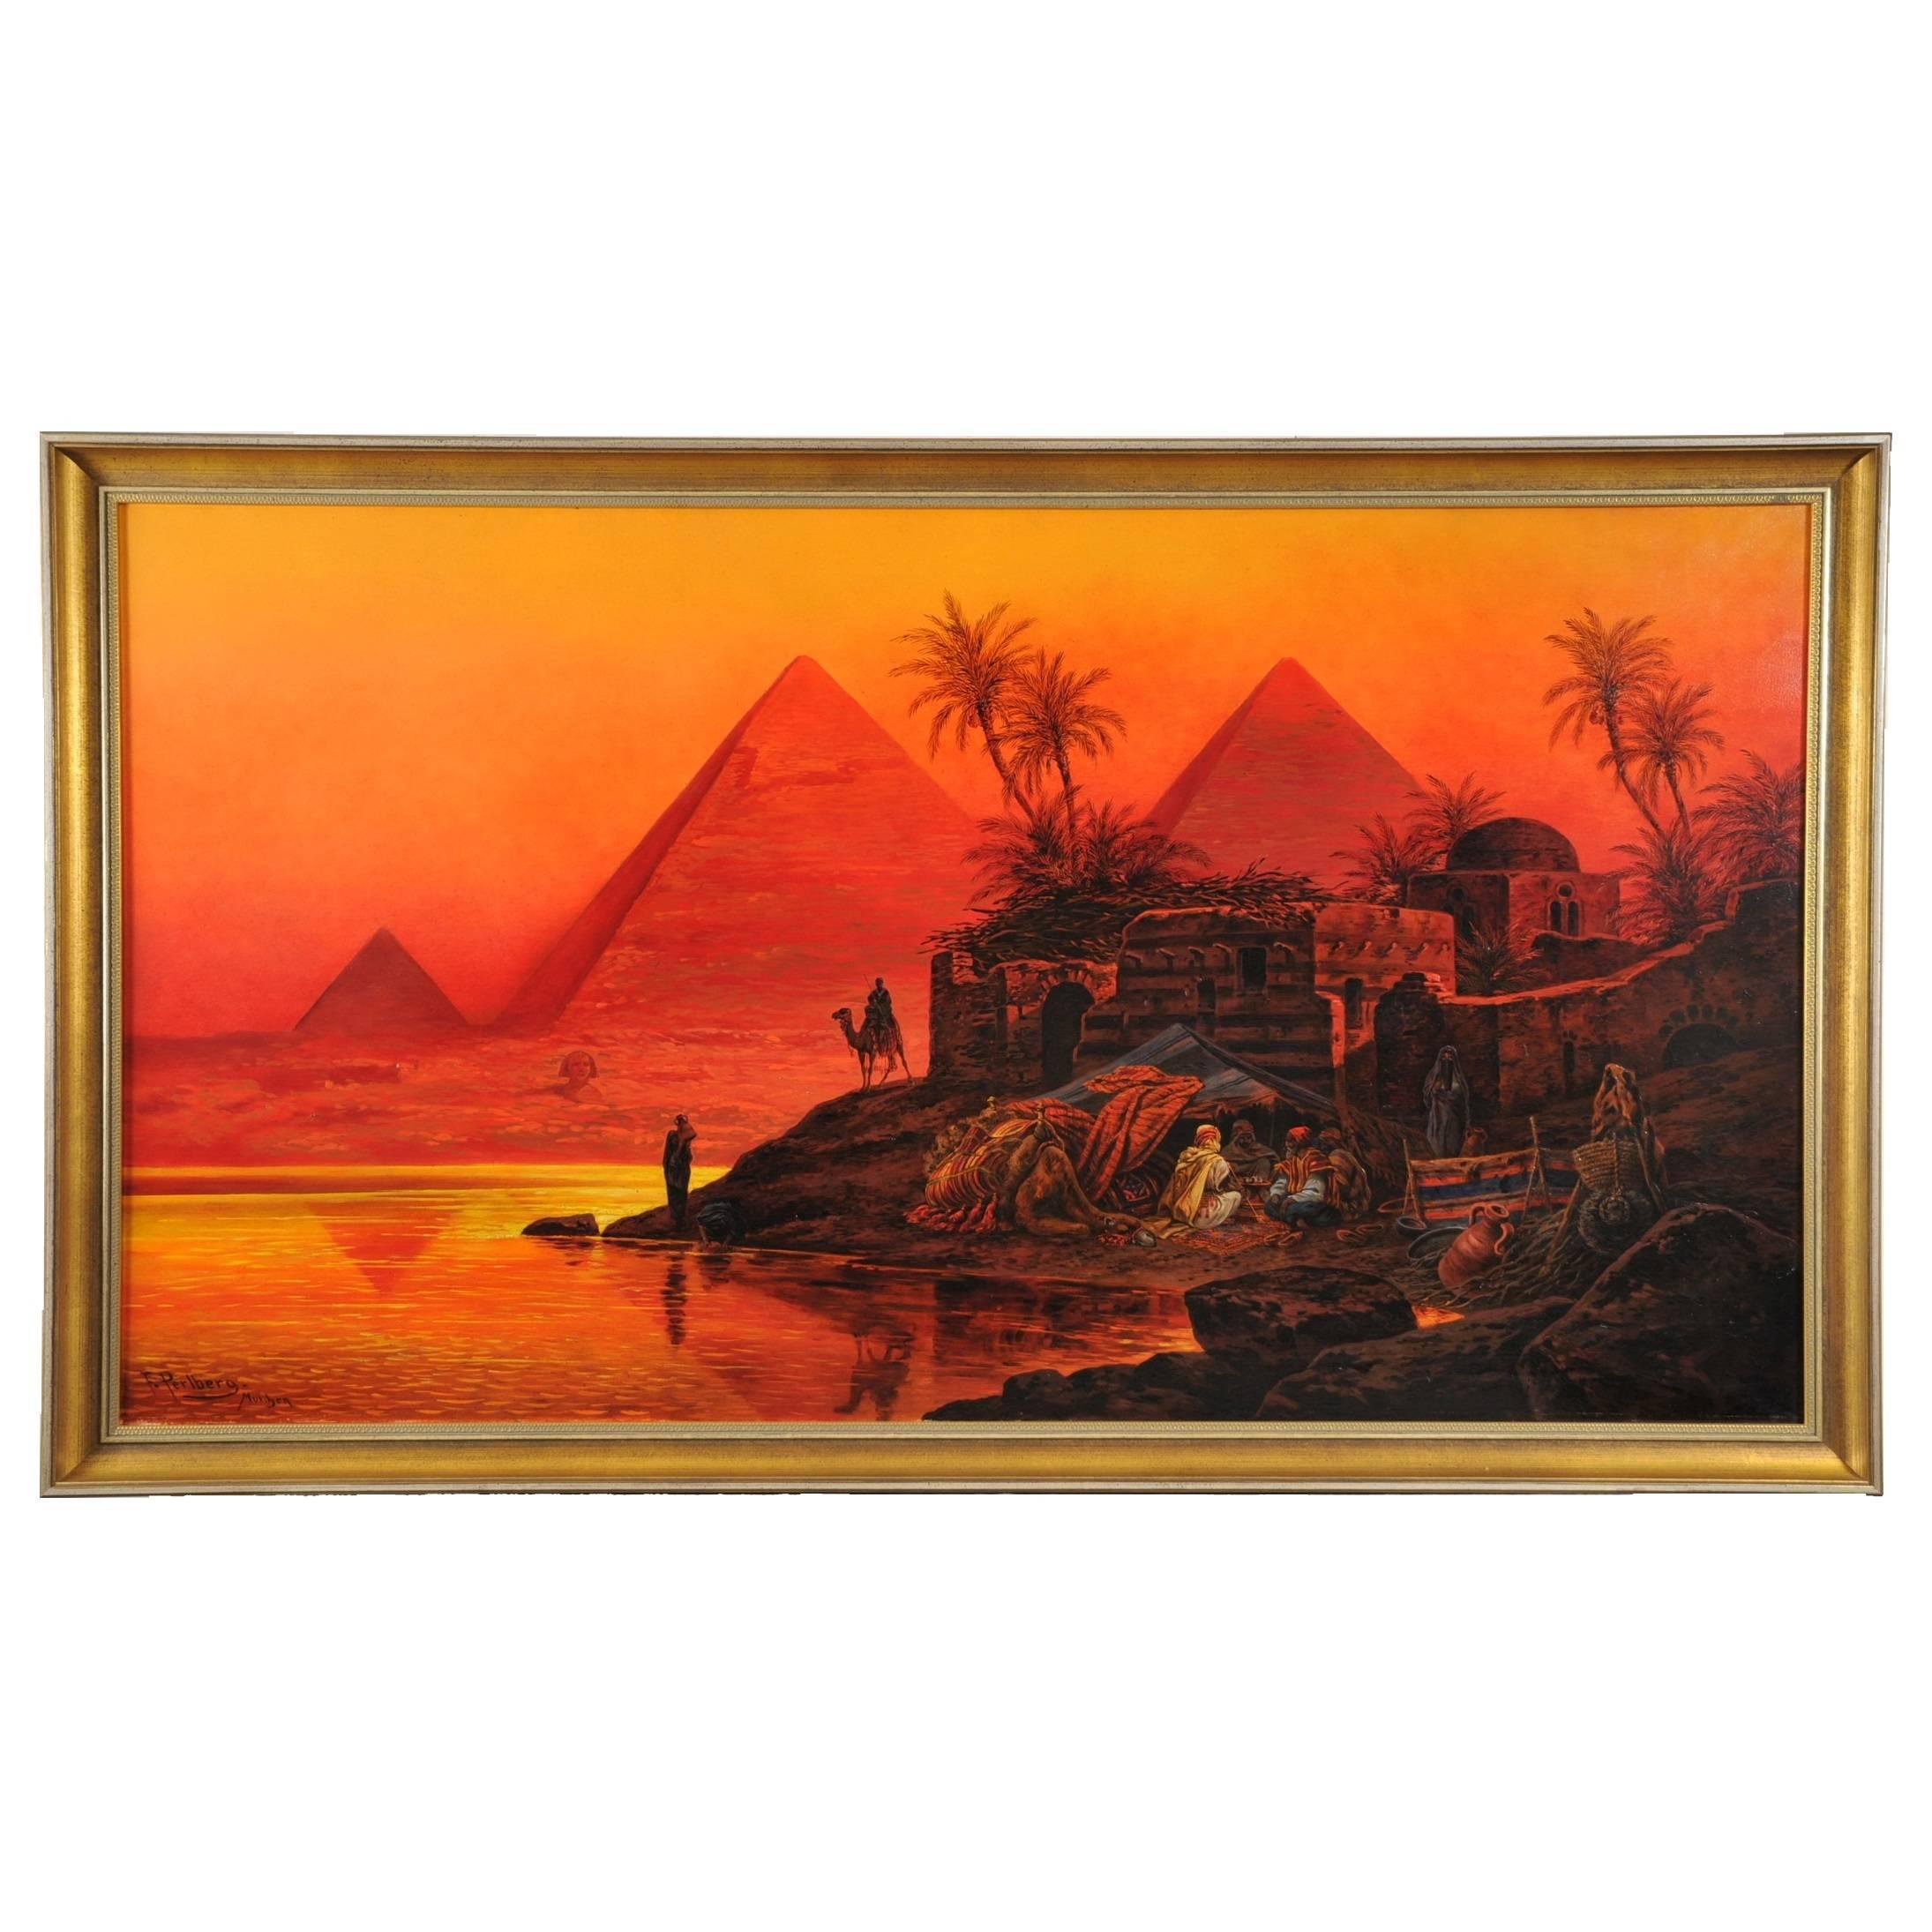 Friedrich Perlberg Landscape Painting – Pyramids and Bedouin camp in the sunset at Giza